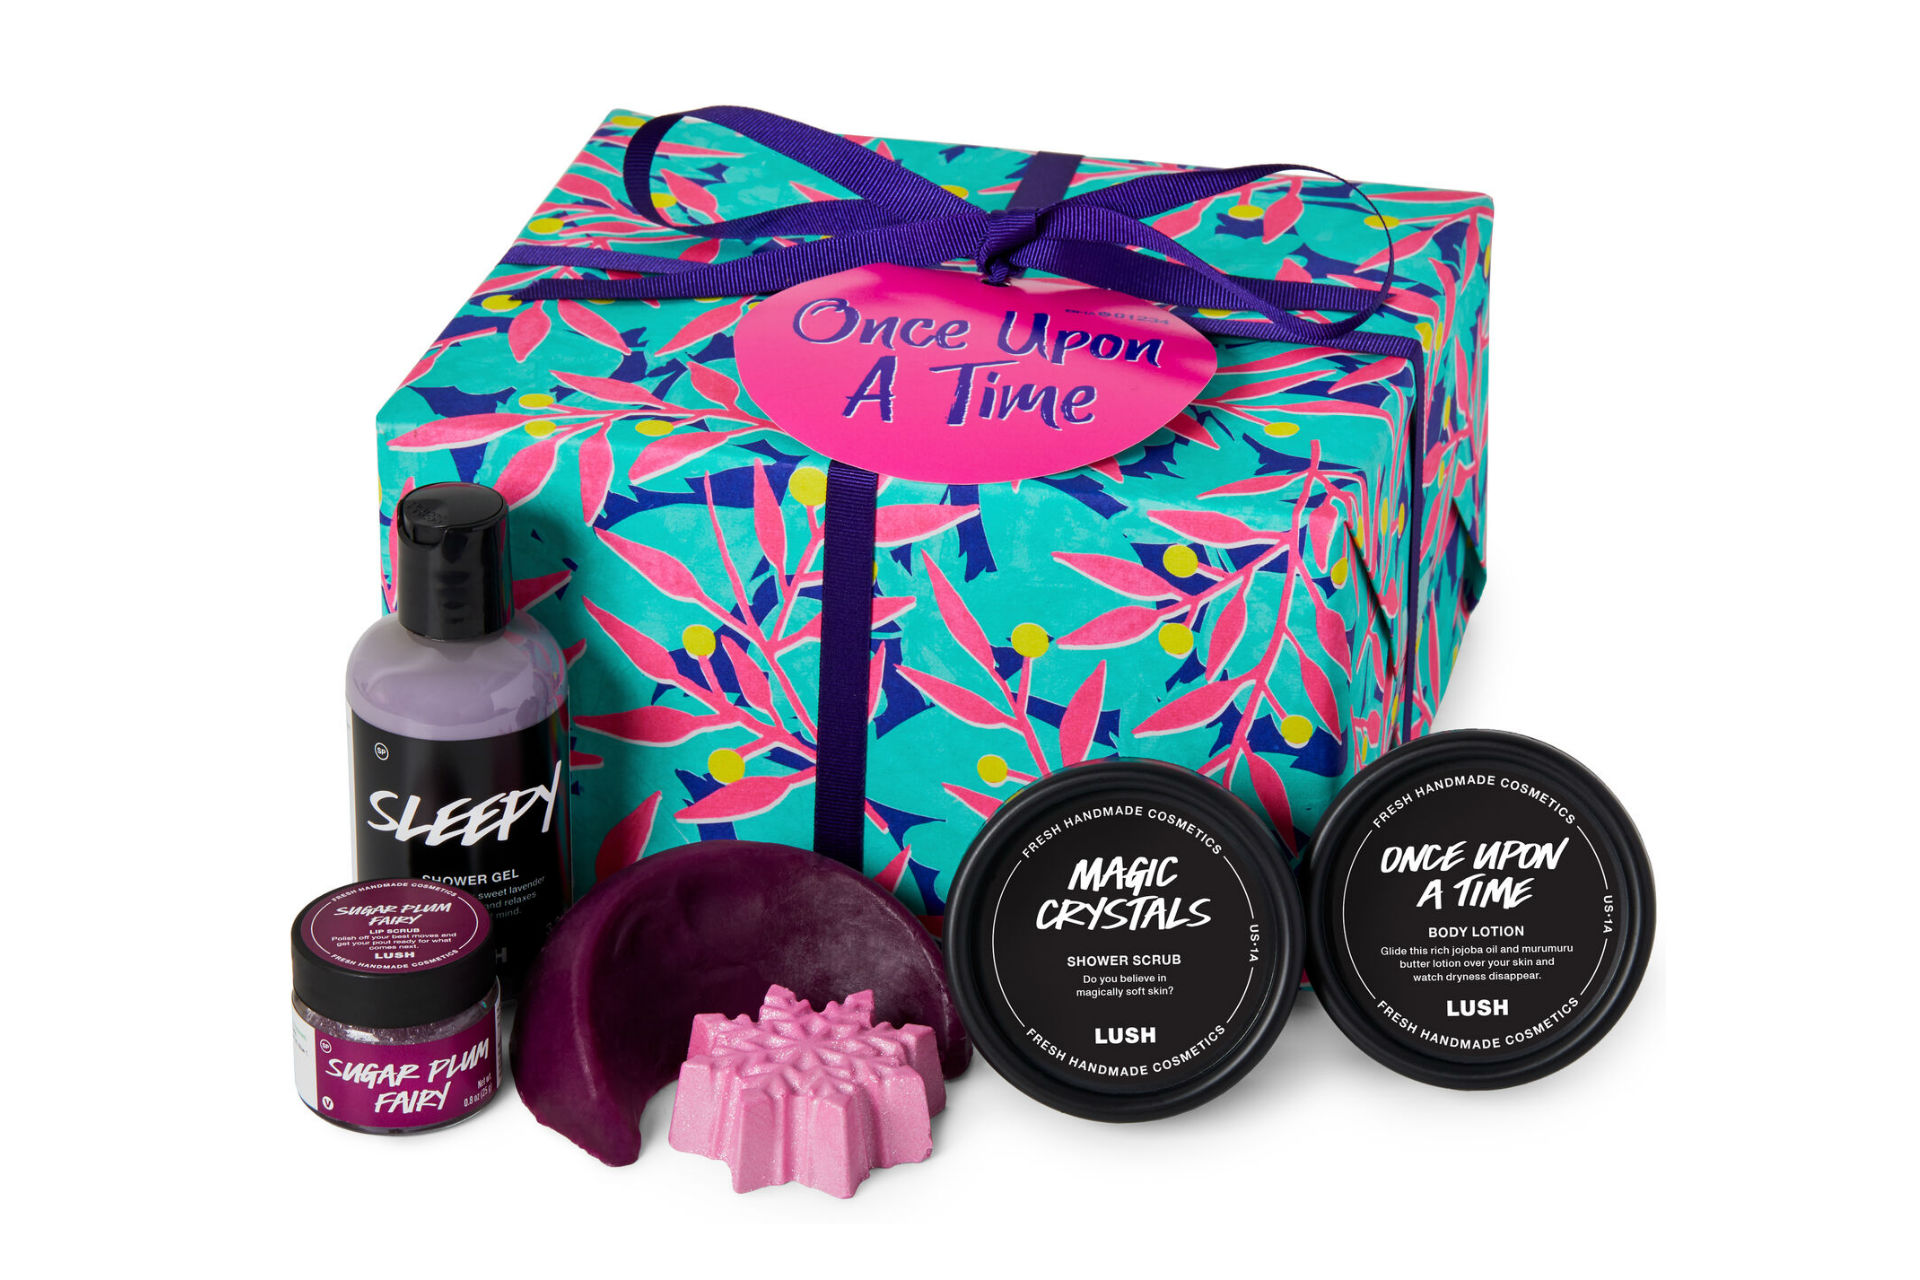 Once Upon a Time gift set 